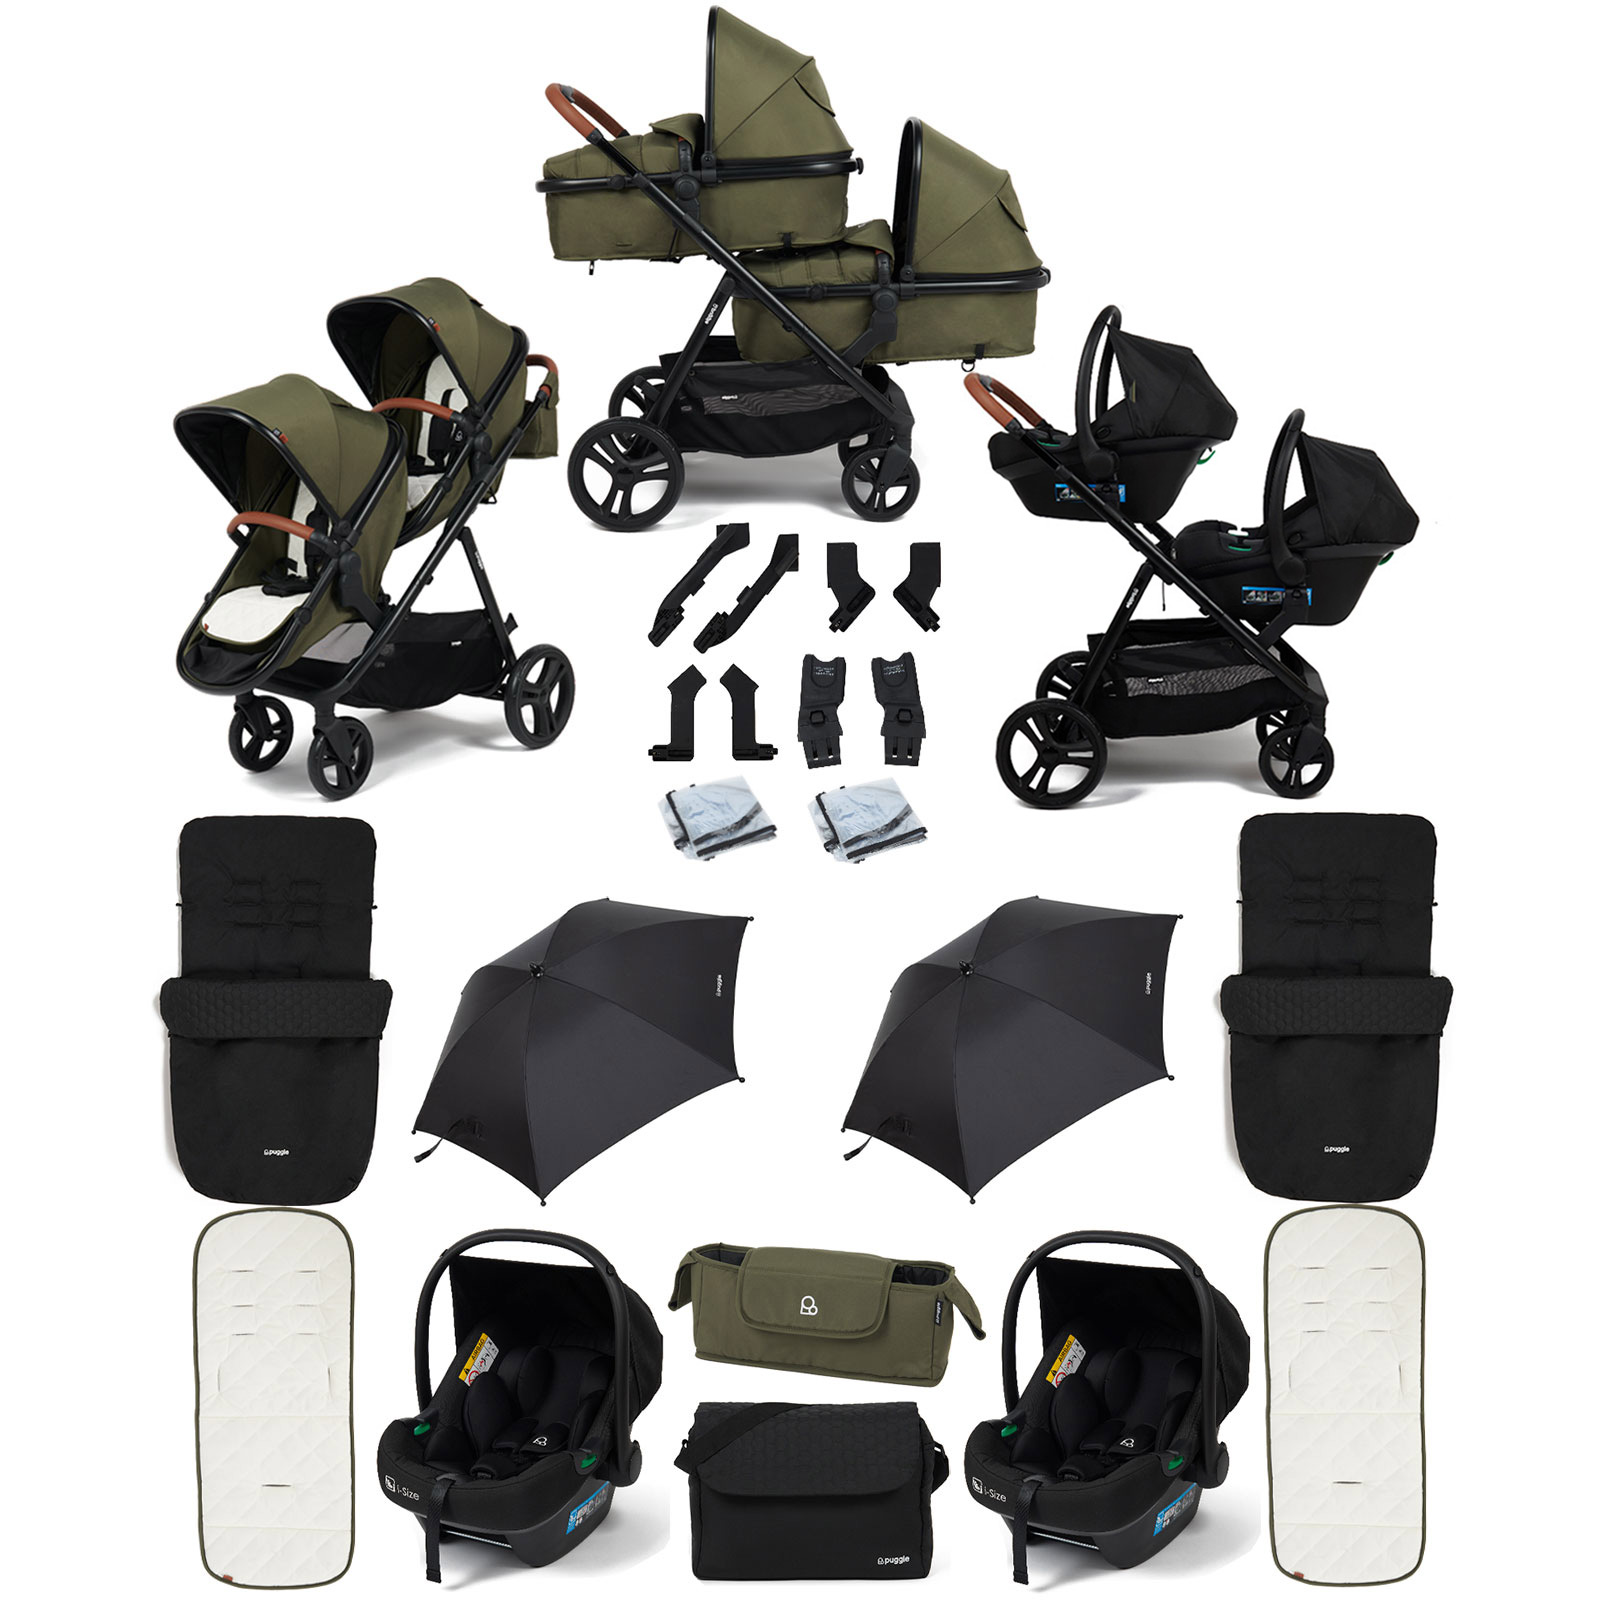 Puggle Memphis 2-in-1 Duo Double Travel System with 2 i-Size Car Seats, 2 Footmuffs, 2 Parasols, and Changing Bag - Forest Green